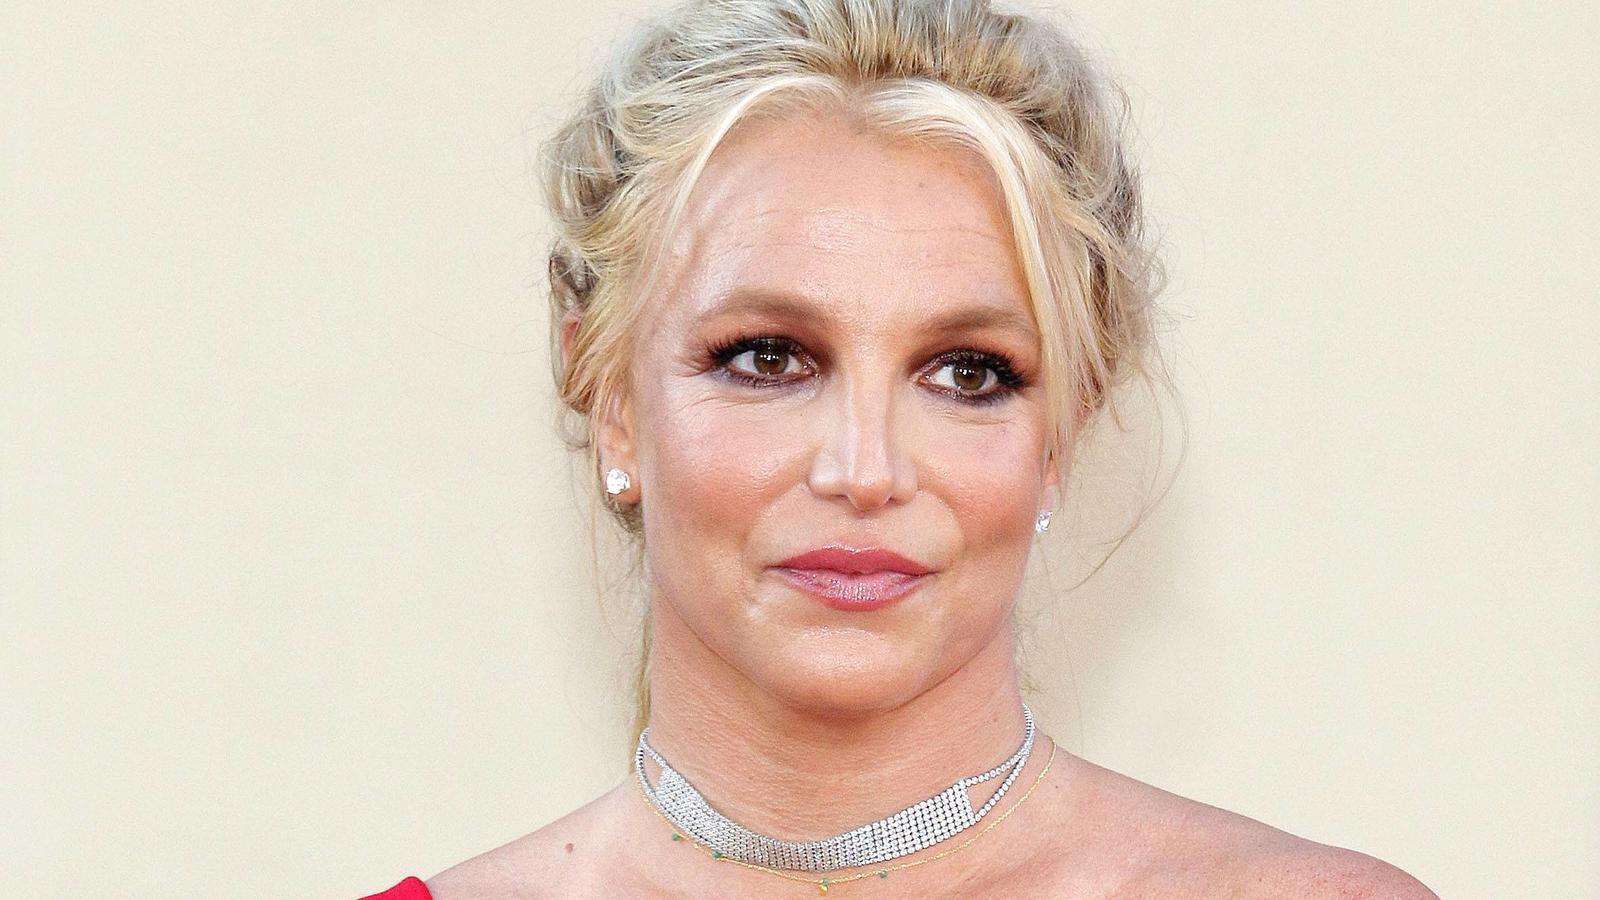  Britney Spears bei der Once Upon A Time In Hollywood Film Premiere am 22.07.2019 in Hollywood, Los Angeles Once Upon A Time In Hollywood Filmpremiere in Los Angeles *** Britney Spears at the Once Upon A Time In Hollywood movie premiere on 22 07 2019